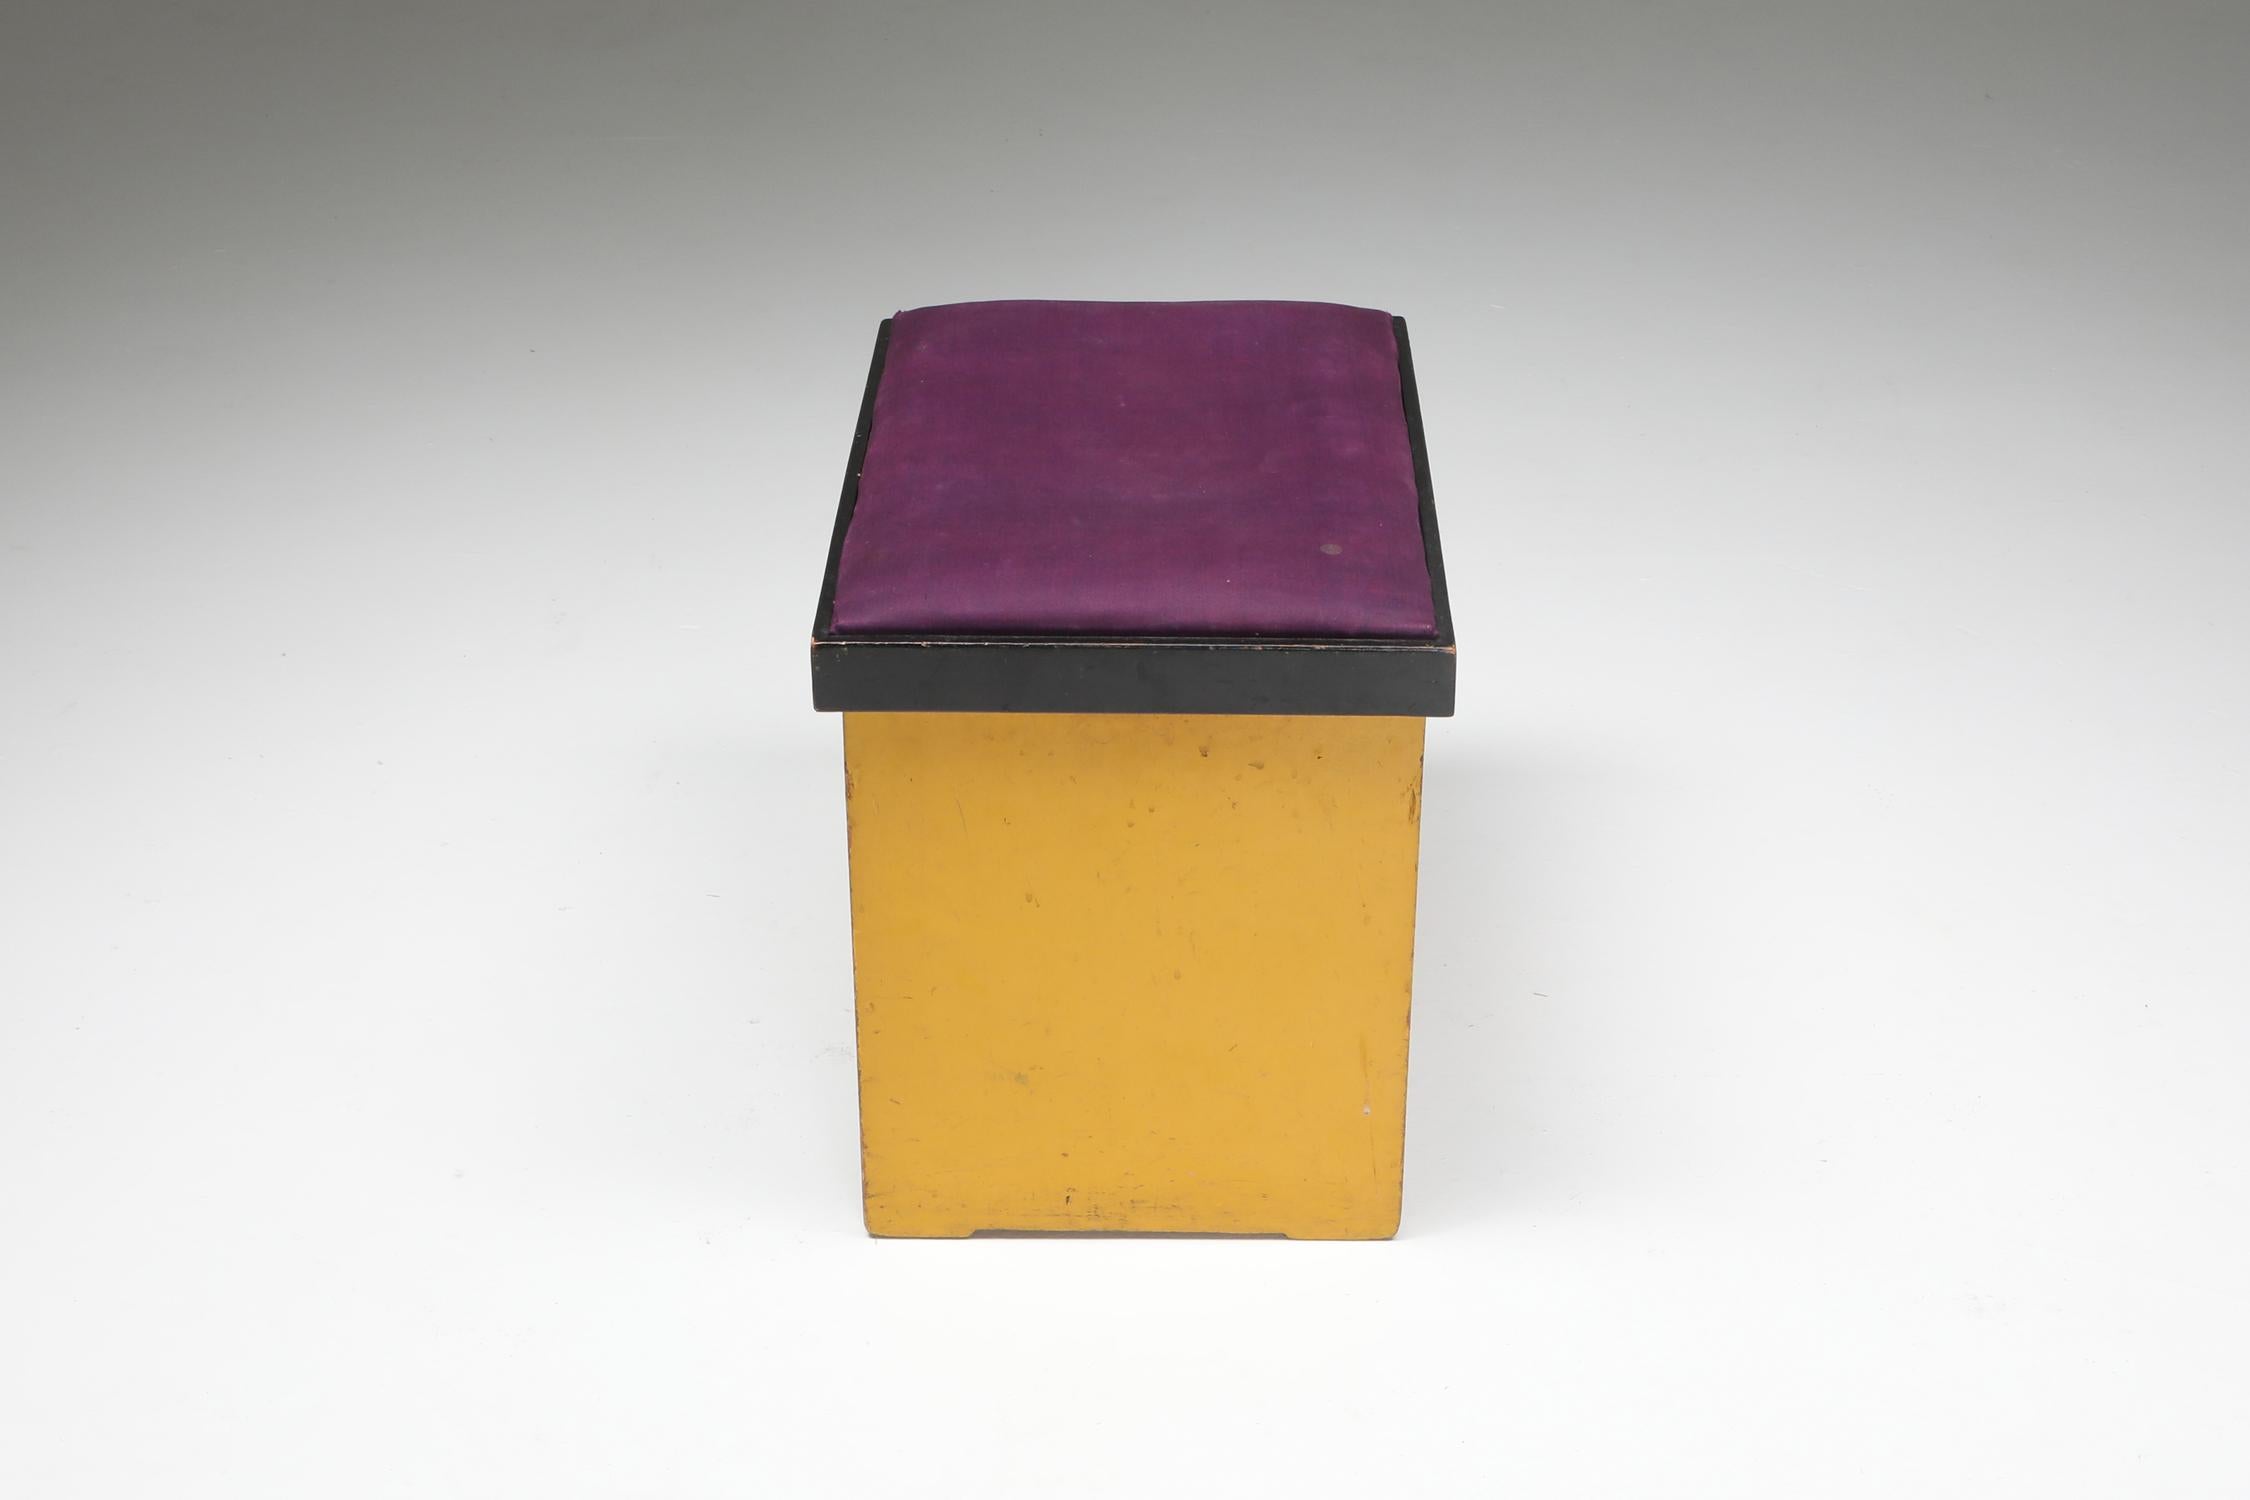 Early 20th Century Modernist Stool by Wouda, 1924